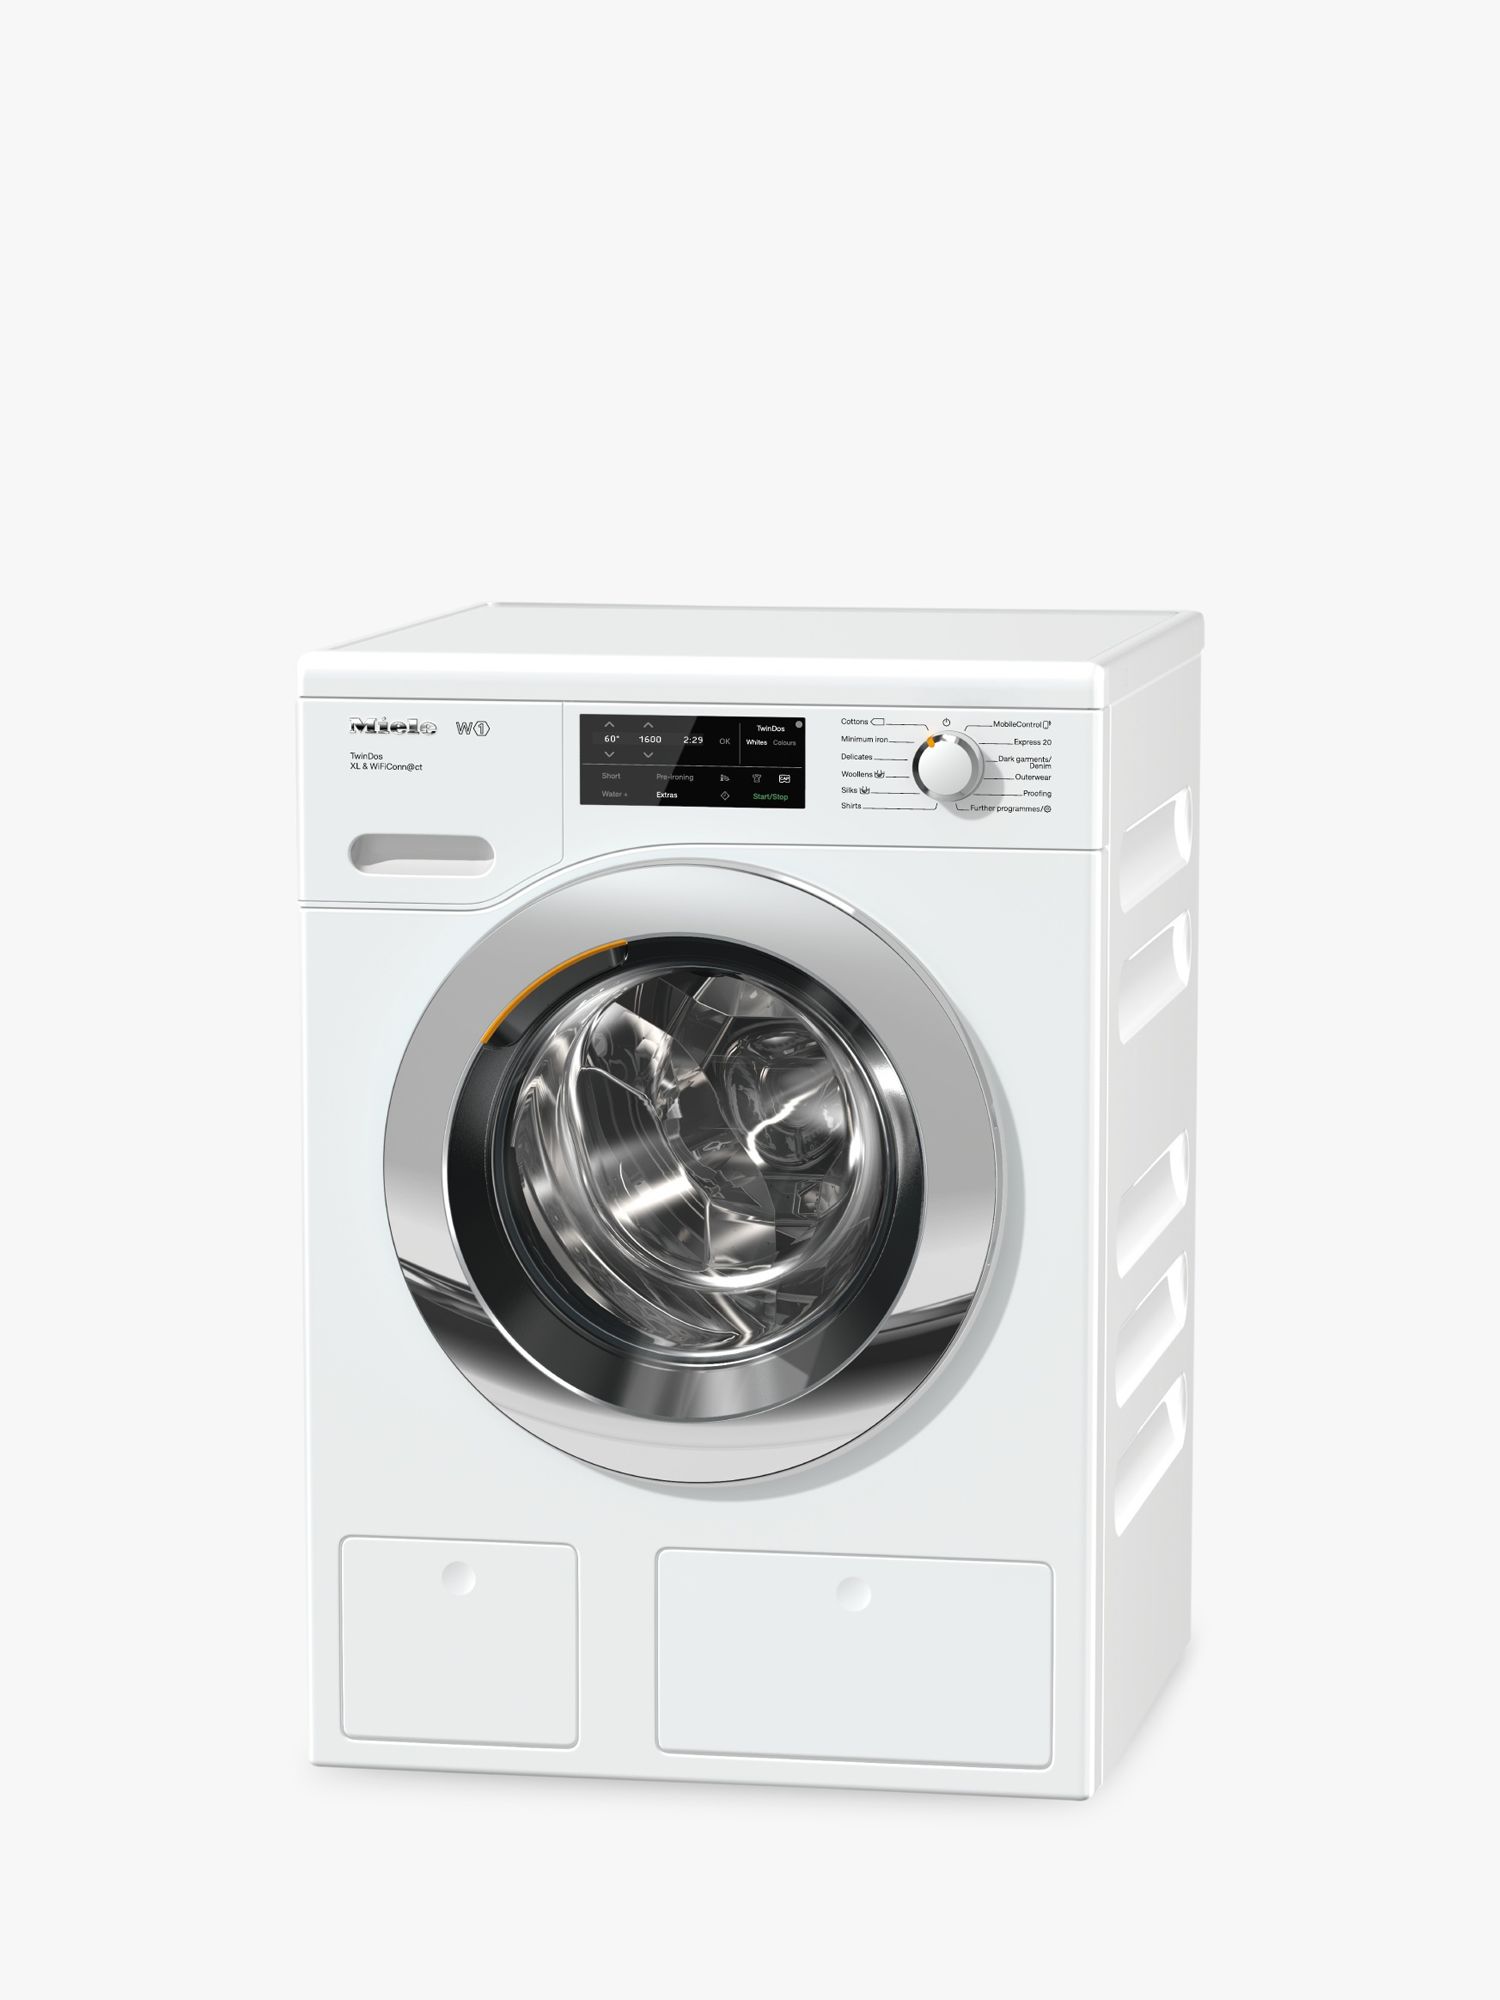 Miele WCI660 TwinDos XL Freestanding Washing Machine, 9kg Load, A+++ Energy Rating, 1600rpm Spin, White